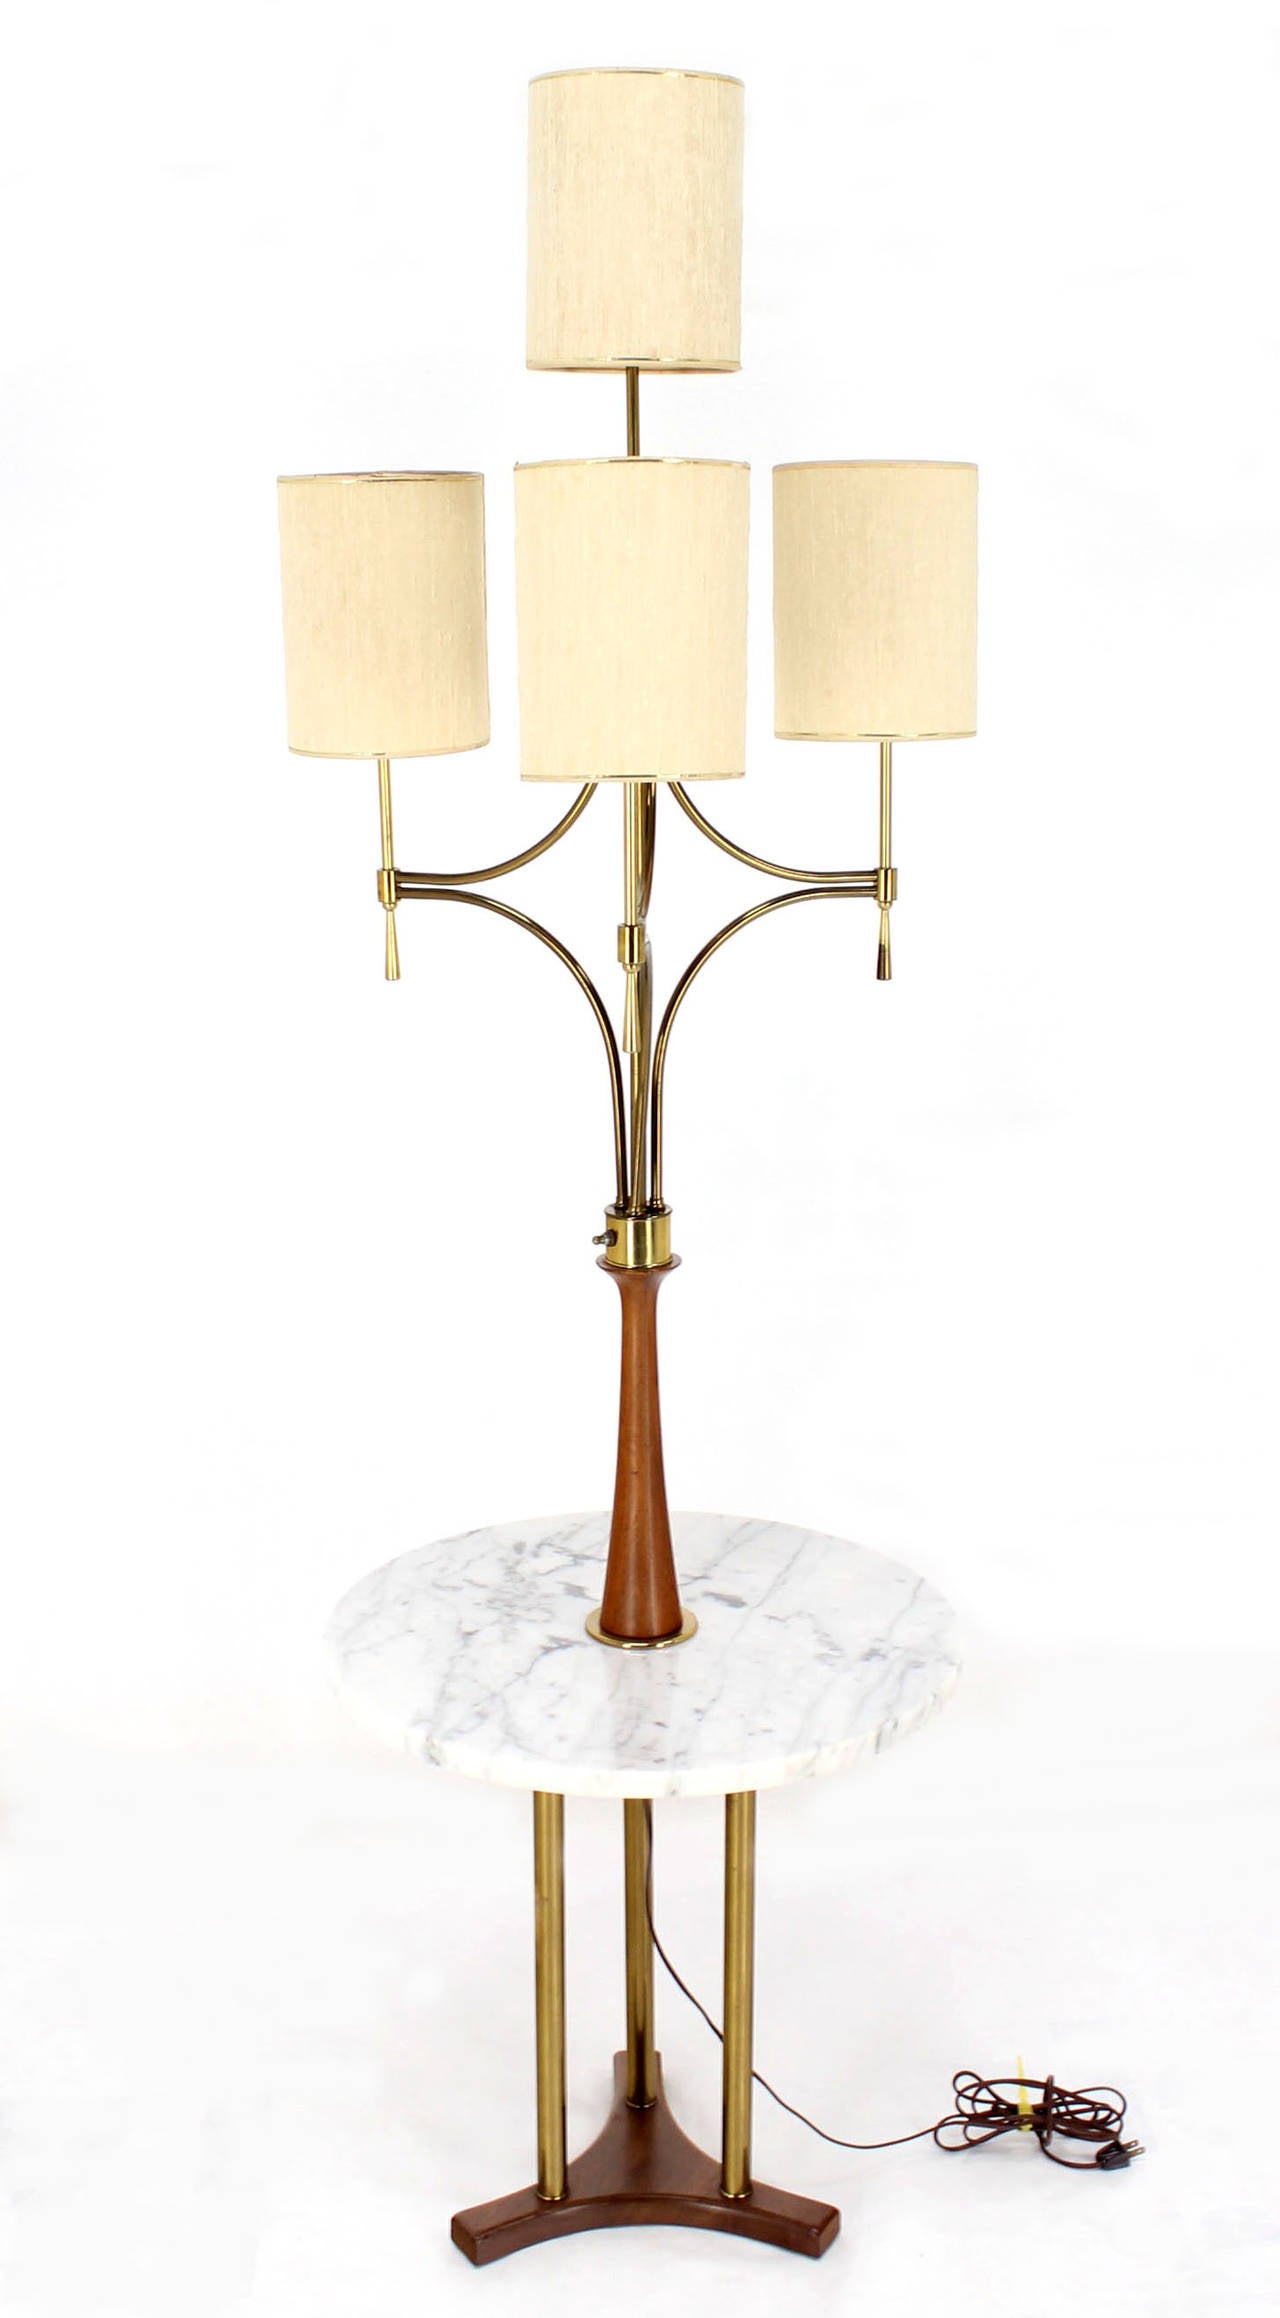 Very nice mid-century modern side table lamp in style of T. Parzinger.